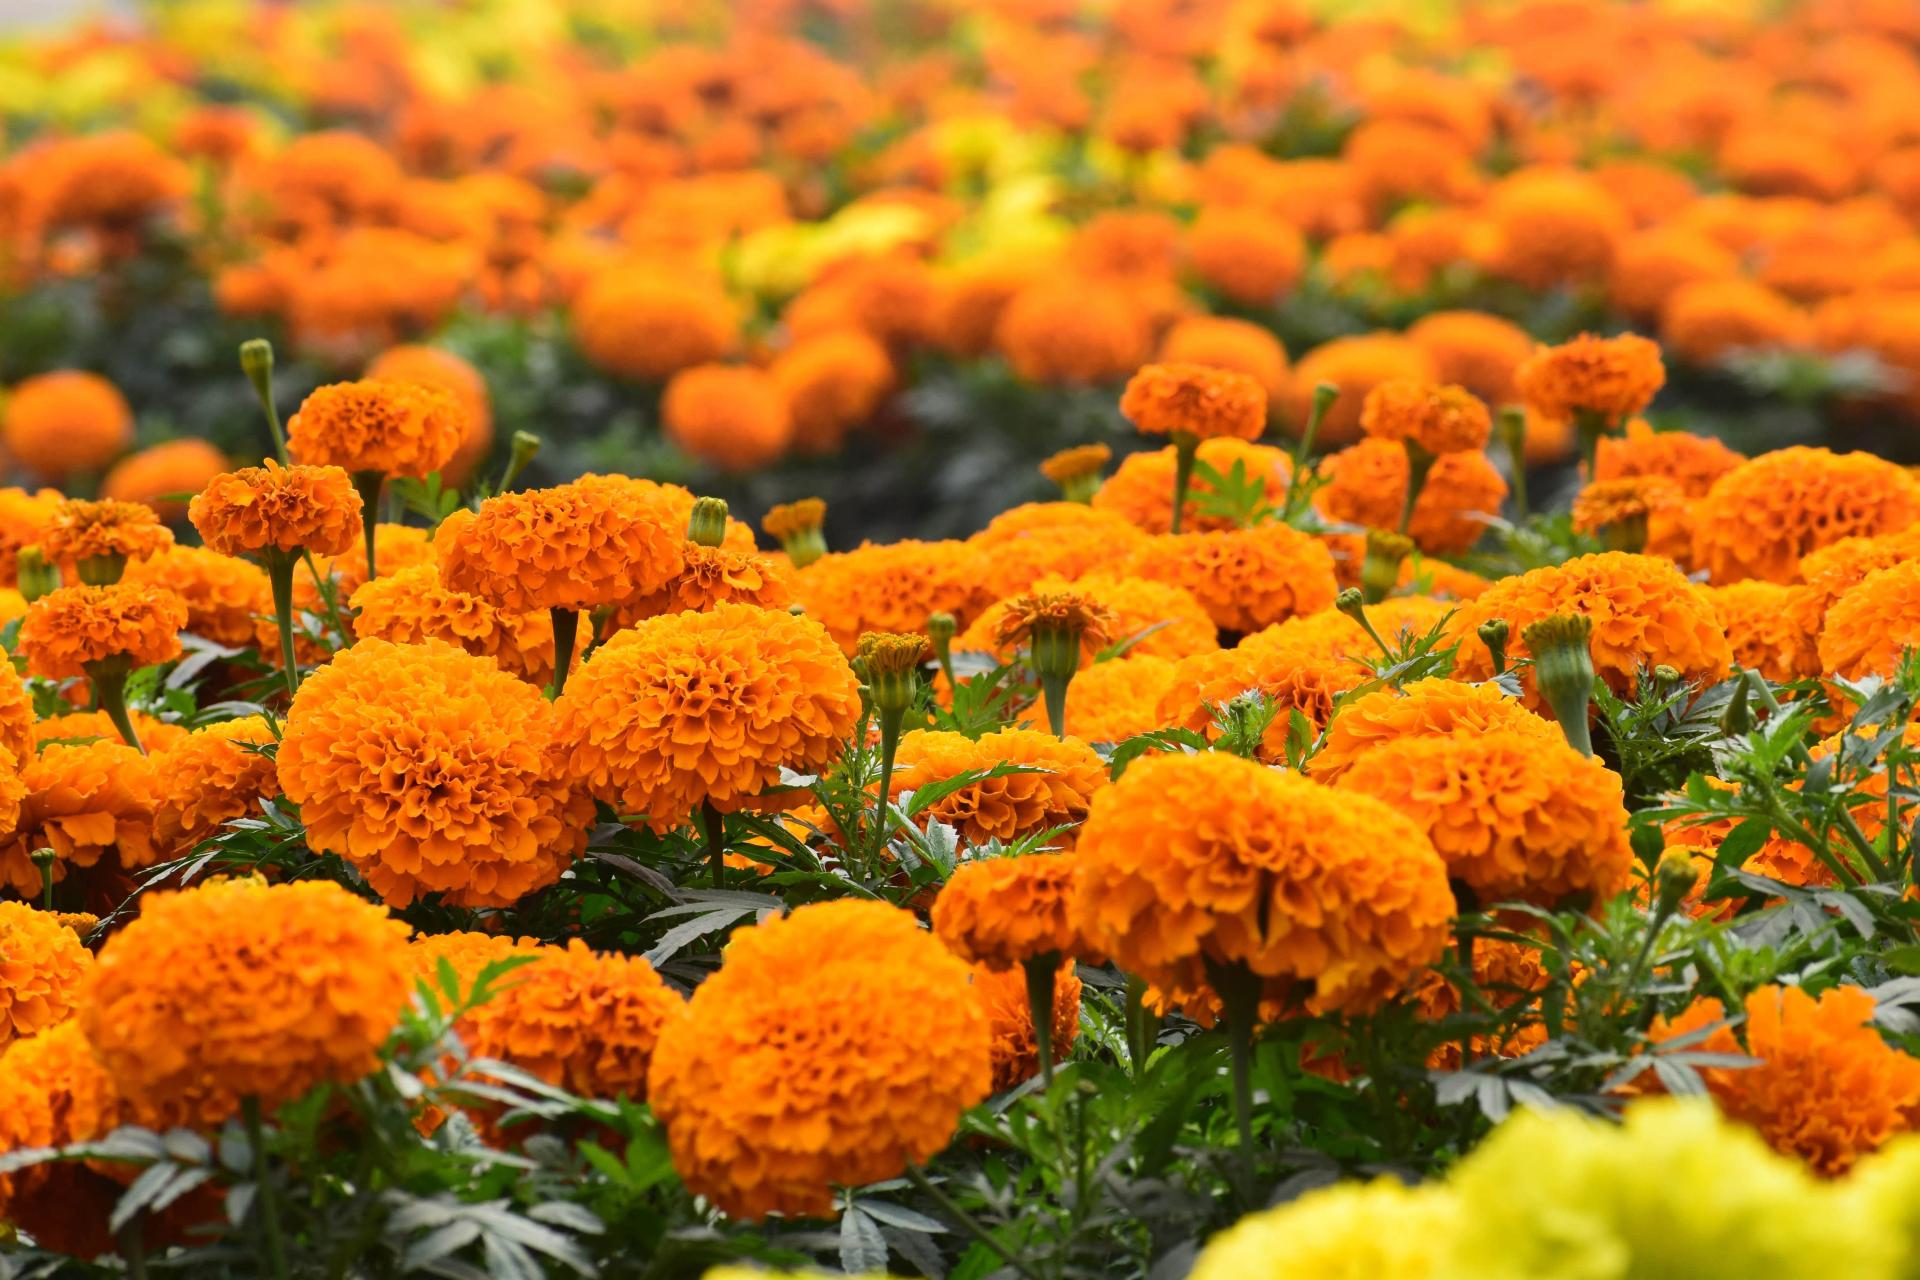 A Field of Marigolds